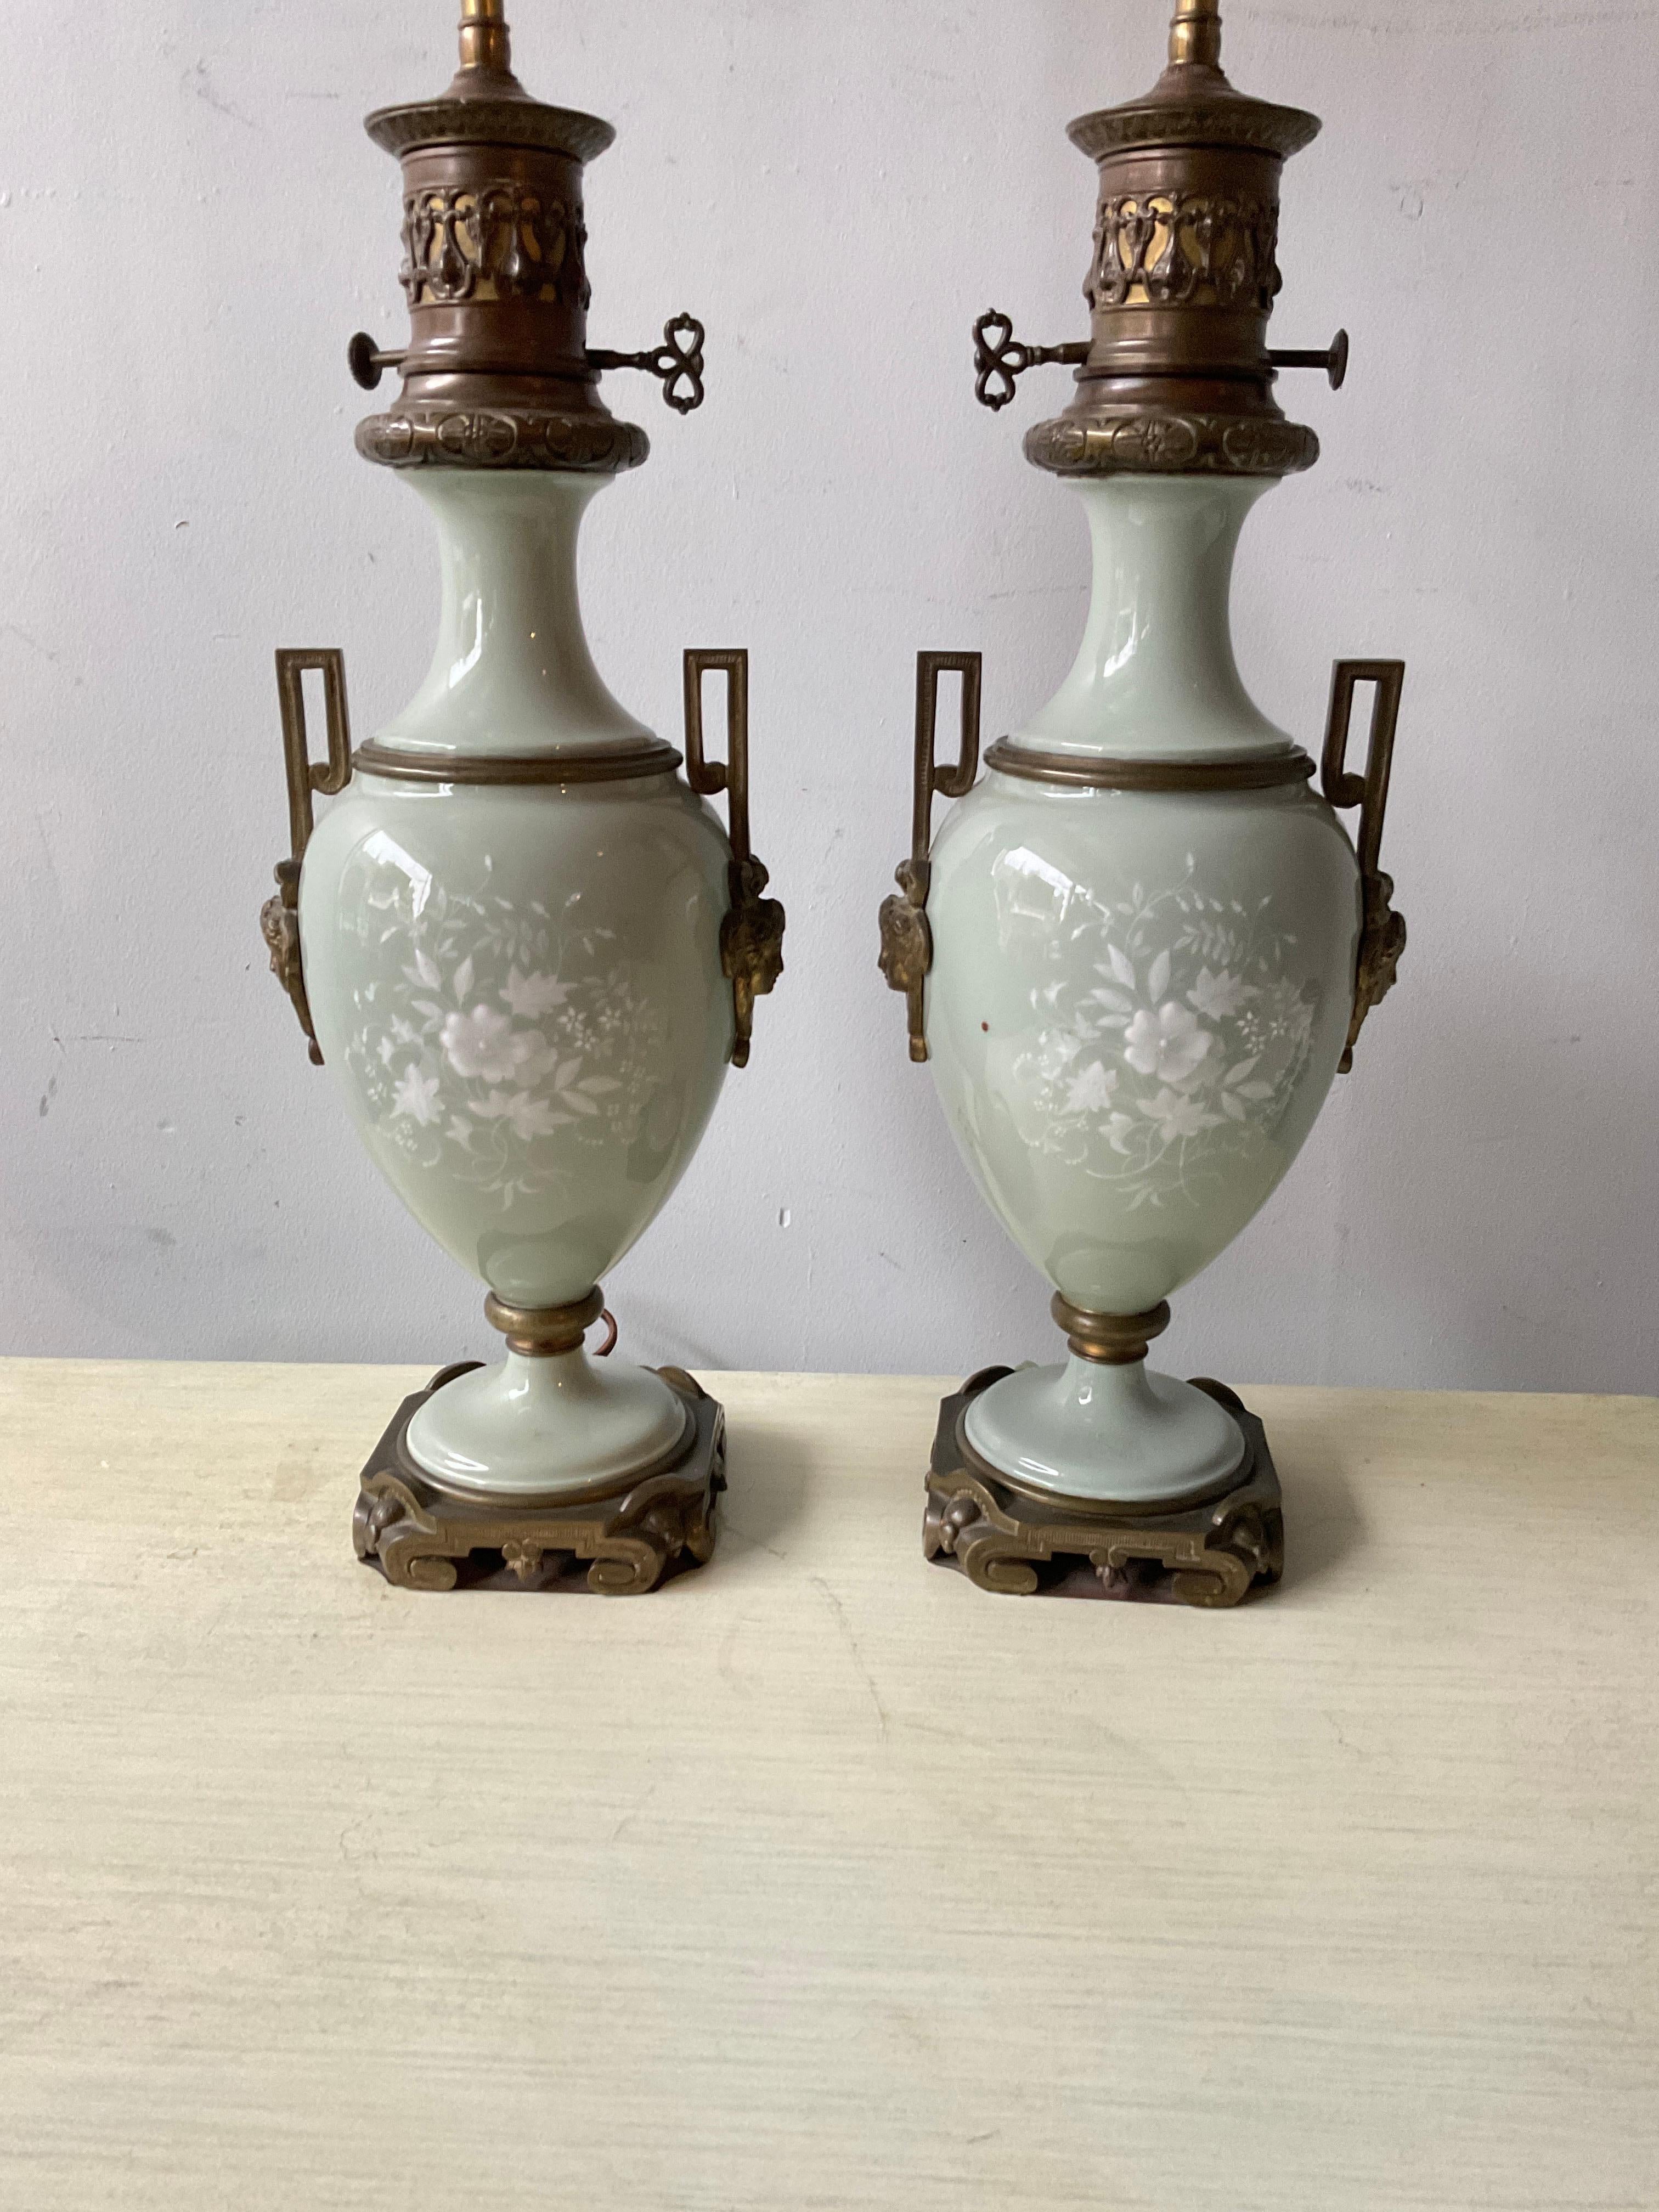 Pair of 1880s French porcelain pate sur pate lamps Height of 33” is to top of the finial.
Lamps need rewiring.